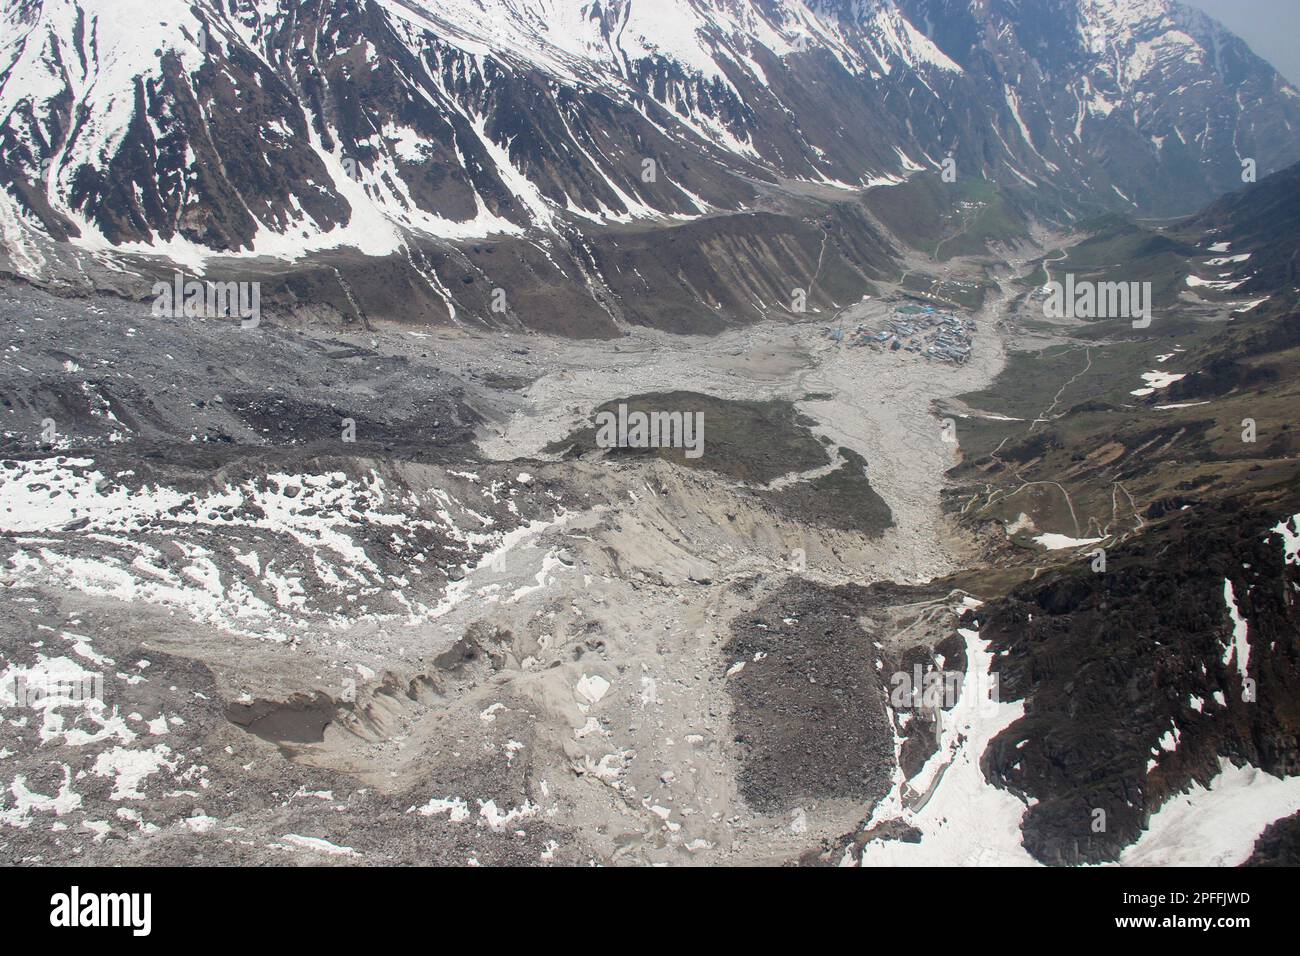 Aerial view of Kedarnath region after disaster in 2013. In June 2013, a multi-day cloudburst centered on the North Indian state of Uttarakhand caused Stock Photo